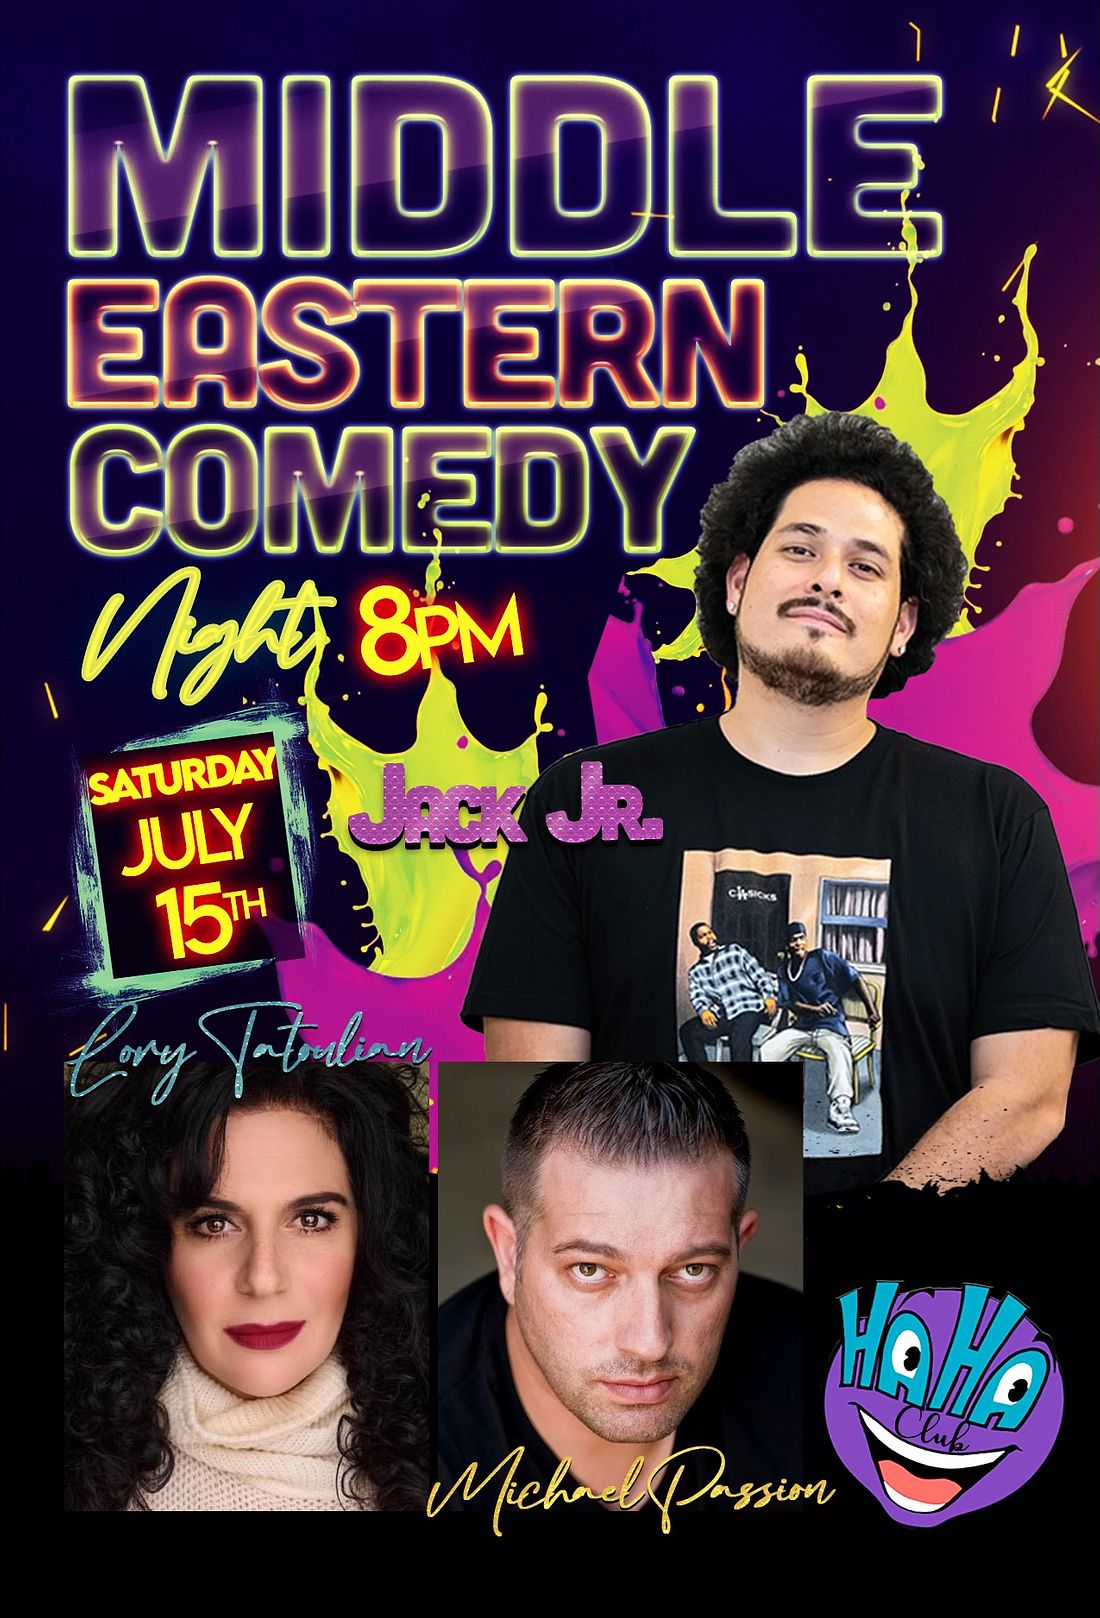 JACK JR Presents: MIDDLE EASTERN COMEDY NIGHT